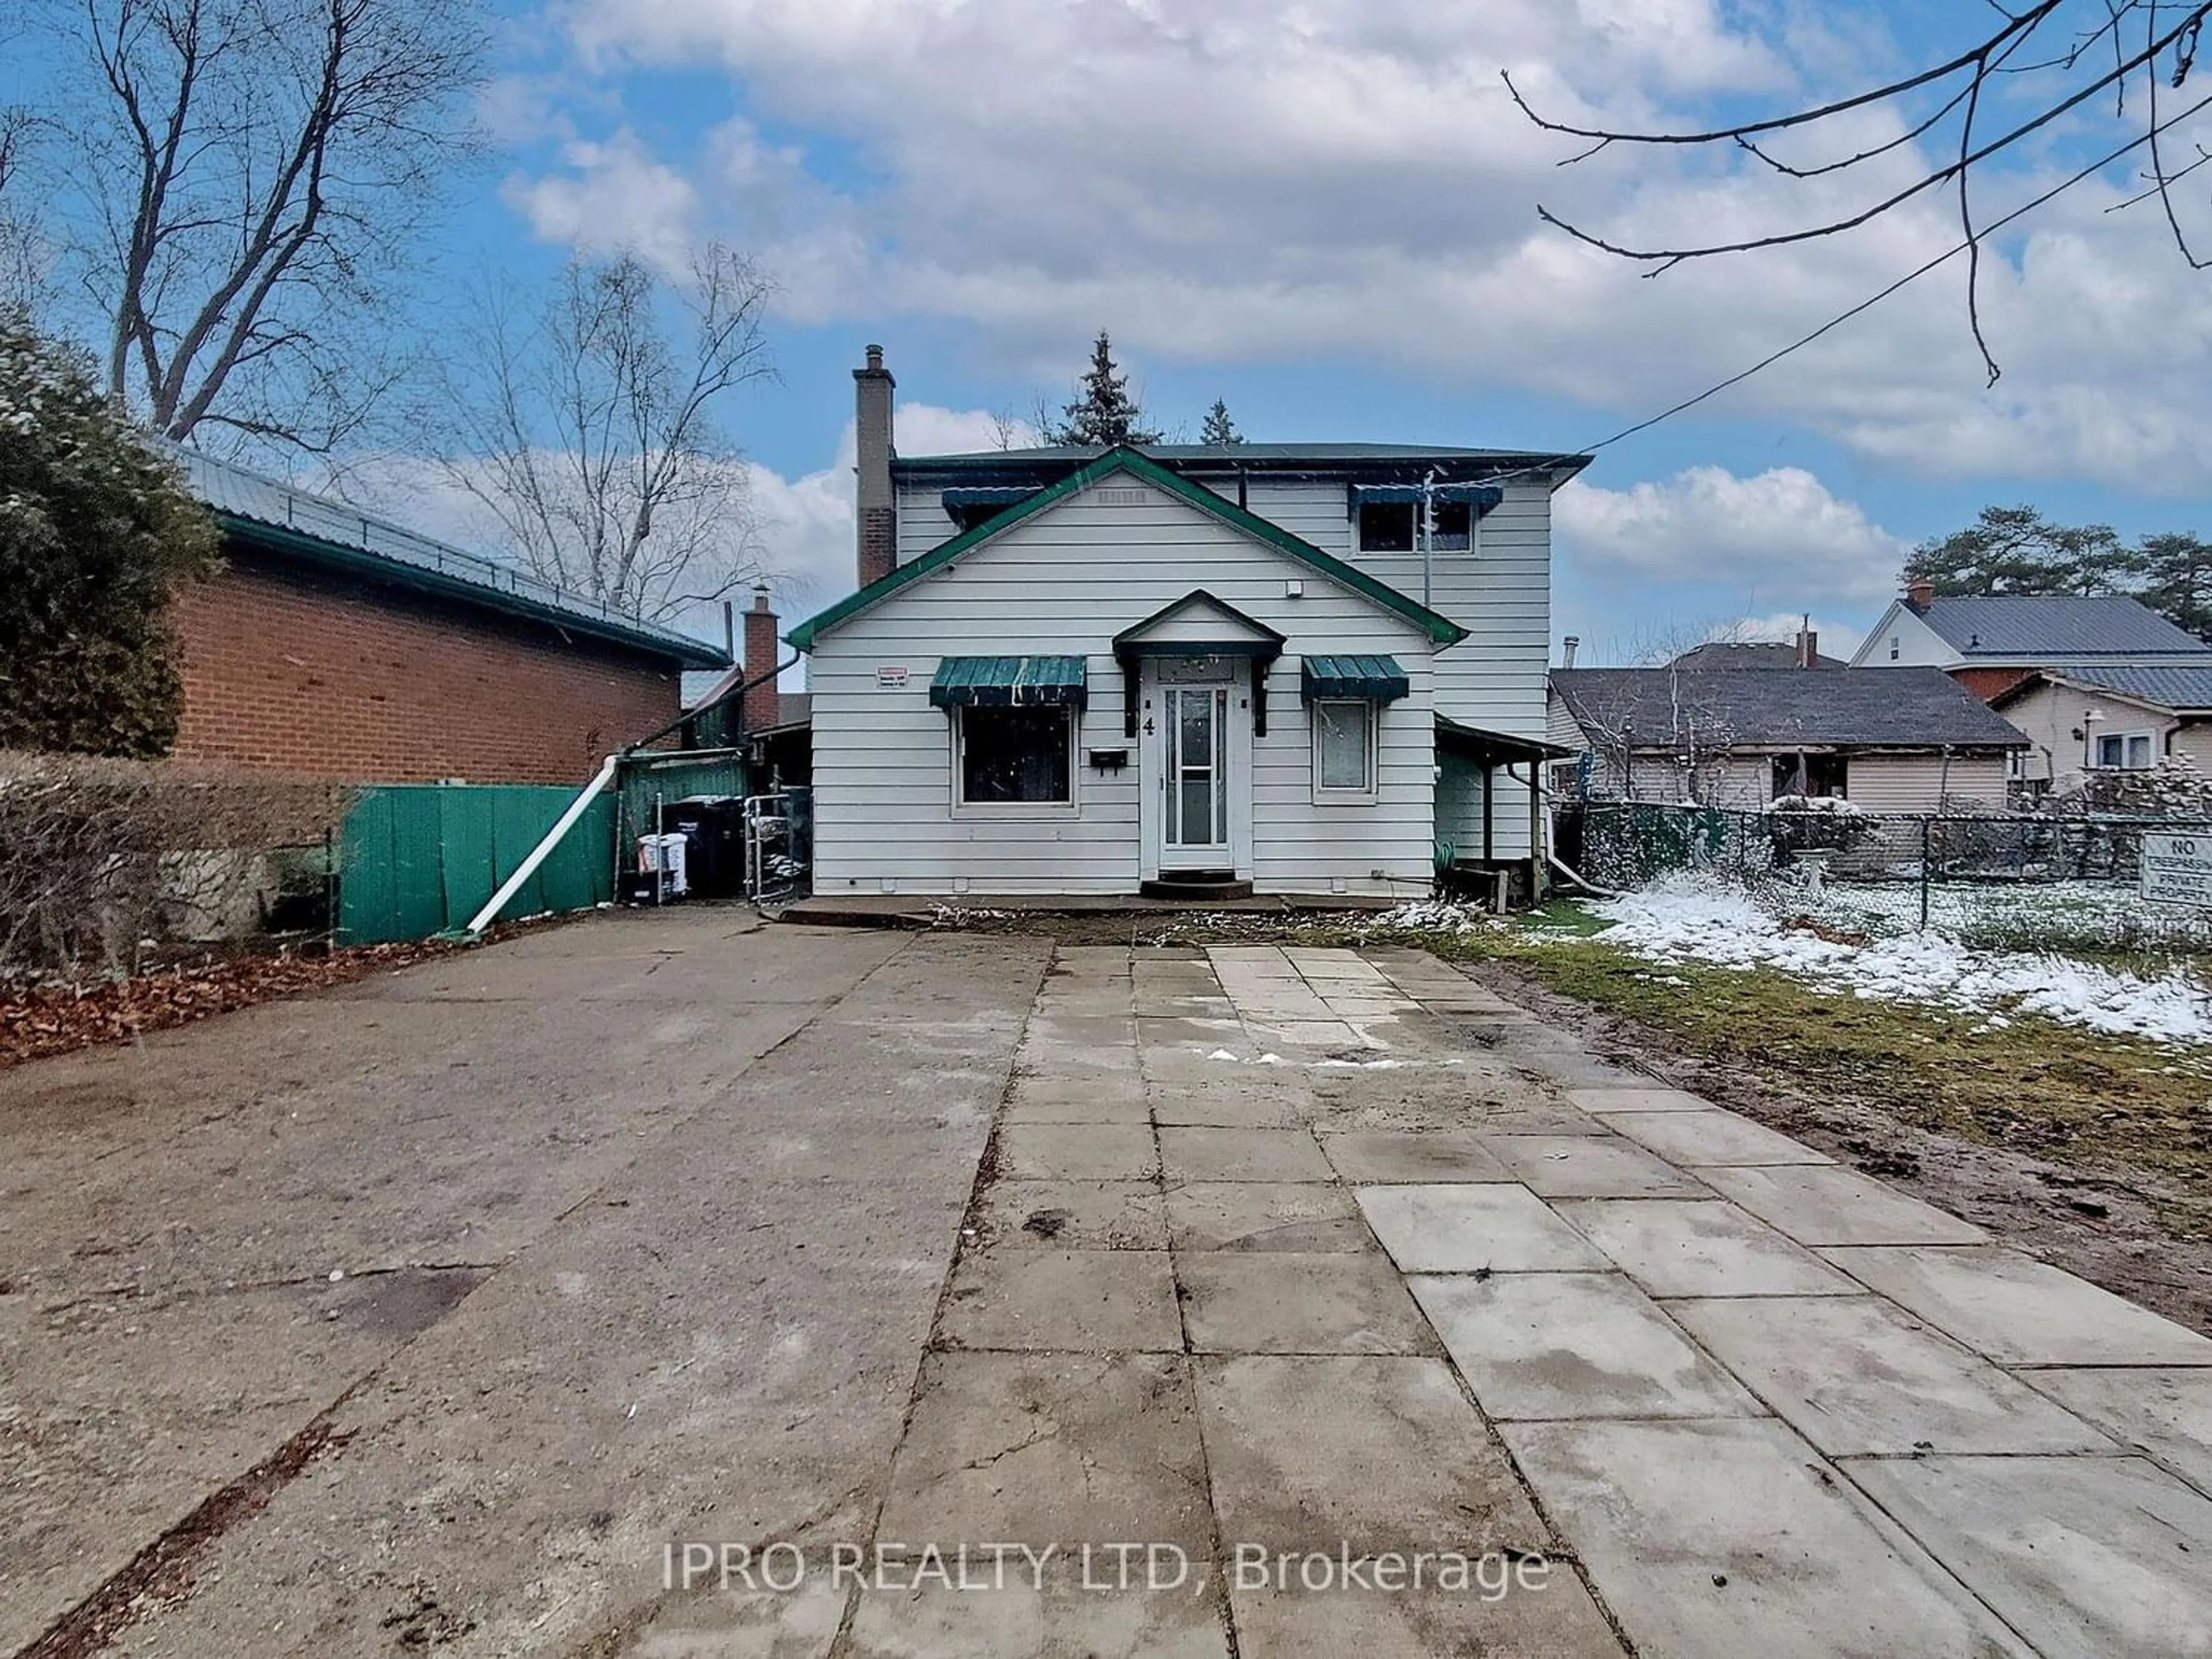 Frontside or backside of a home for 4 Mcmurchy Ave, Brampton Ontario L6Y 1X9